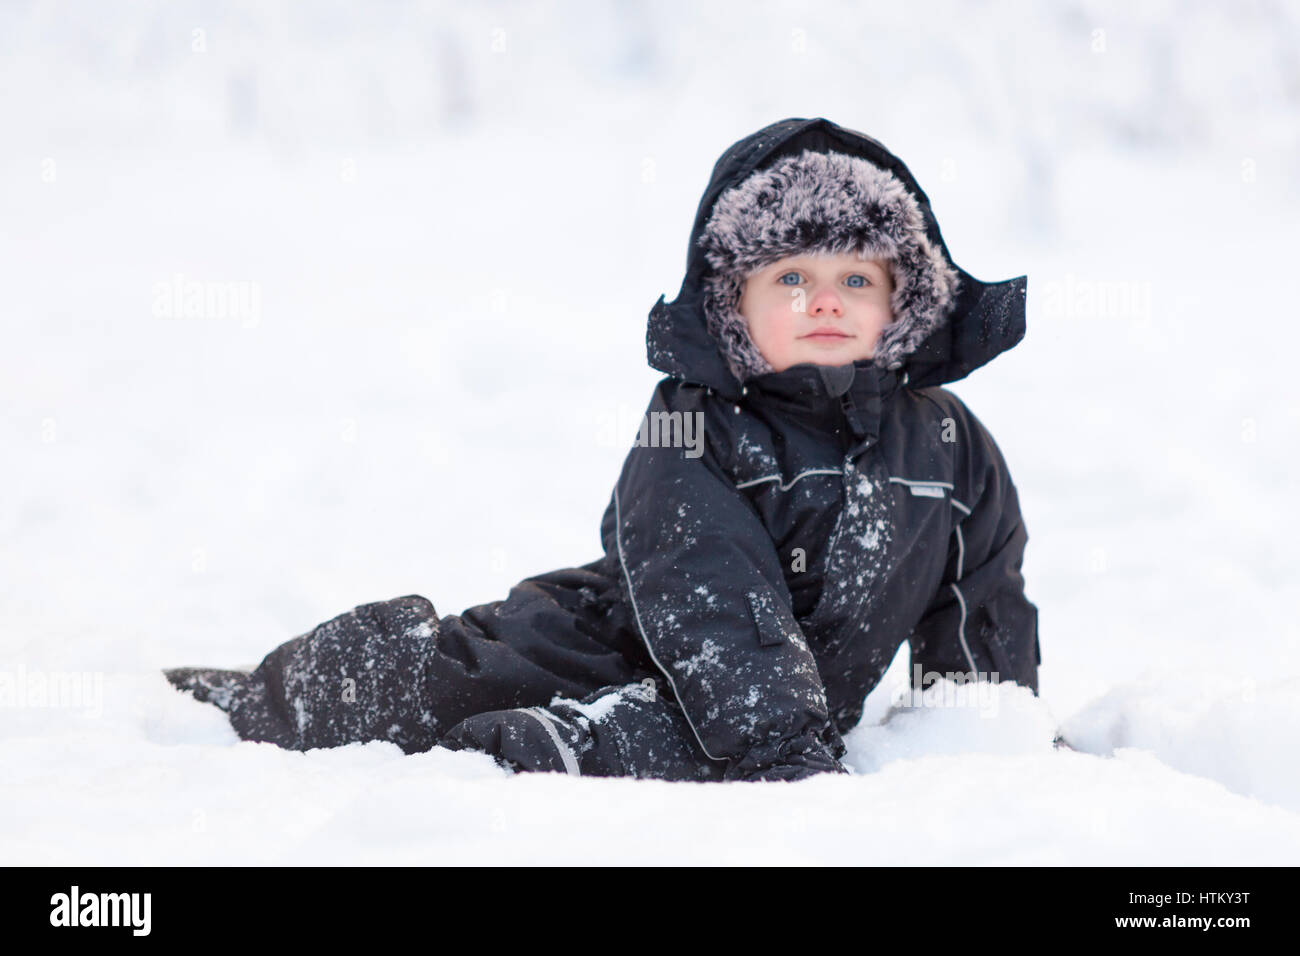 Young boy in warm winter thermal suit clothing outdoor portrait in